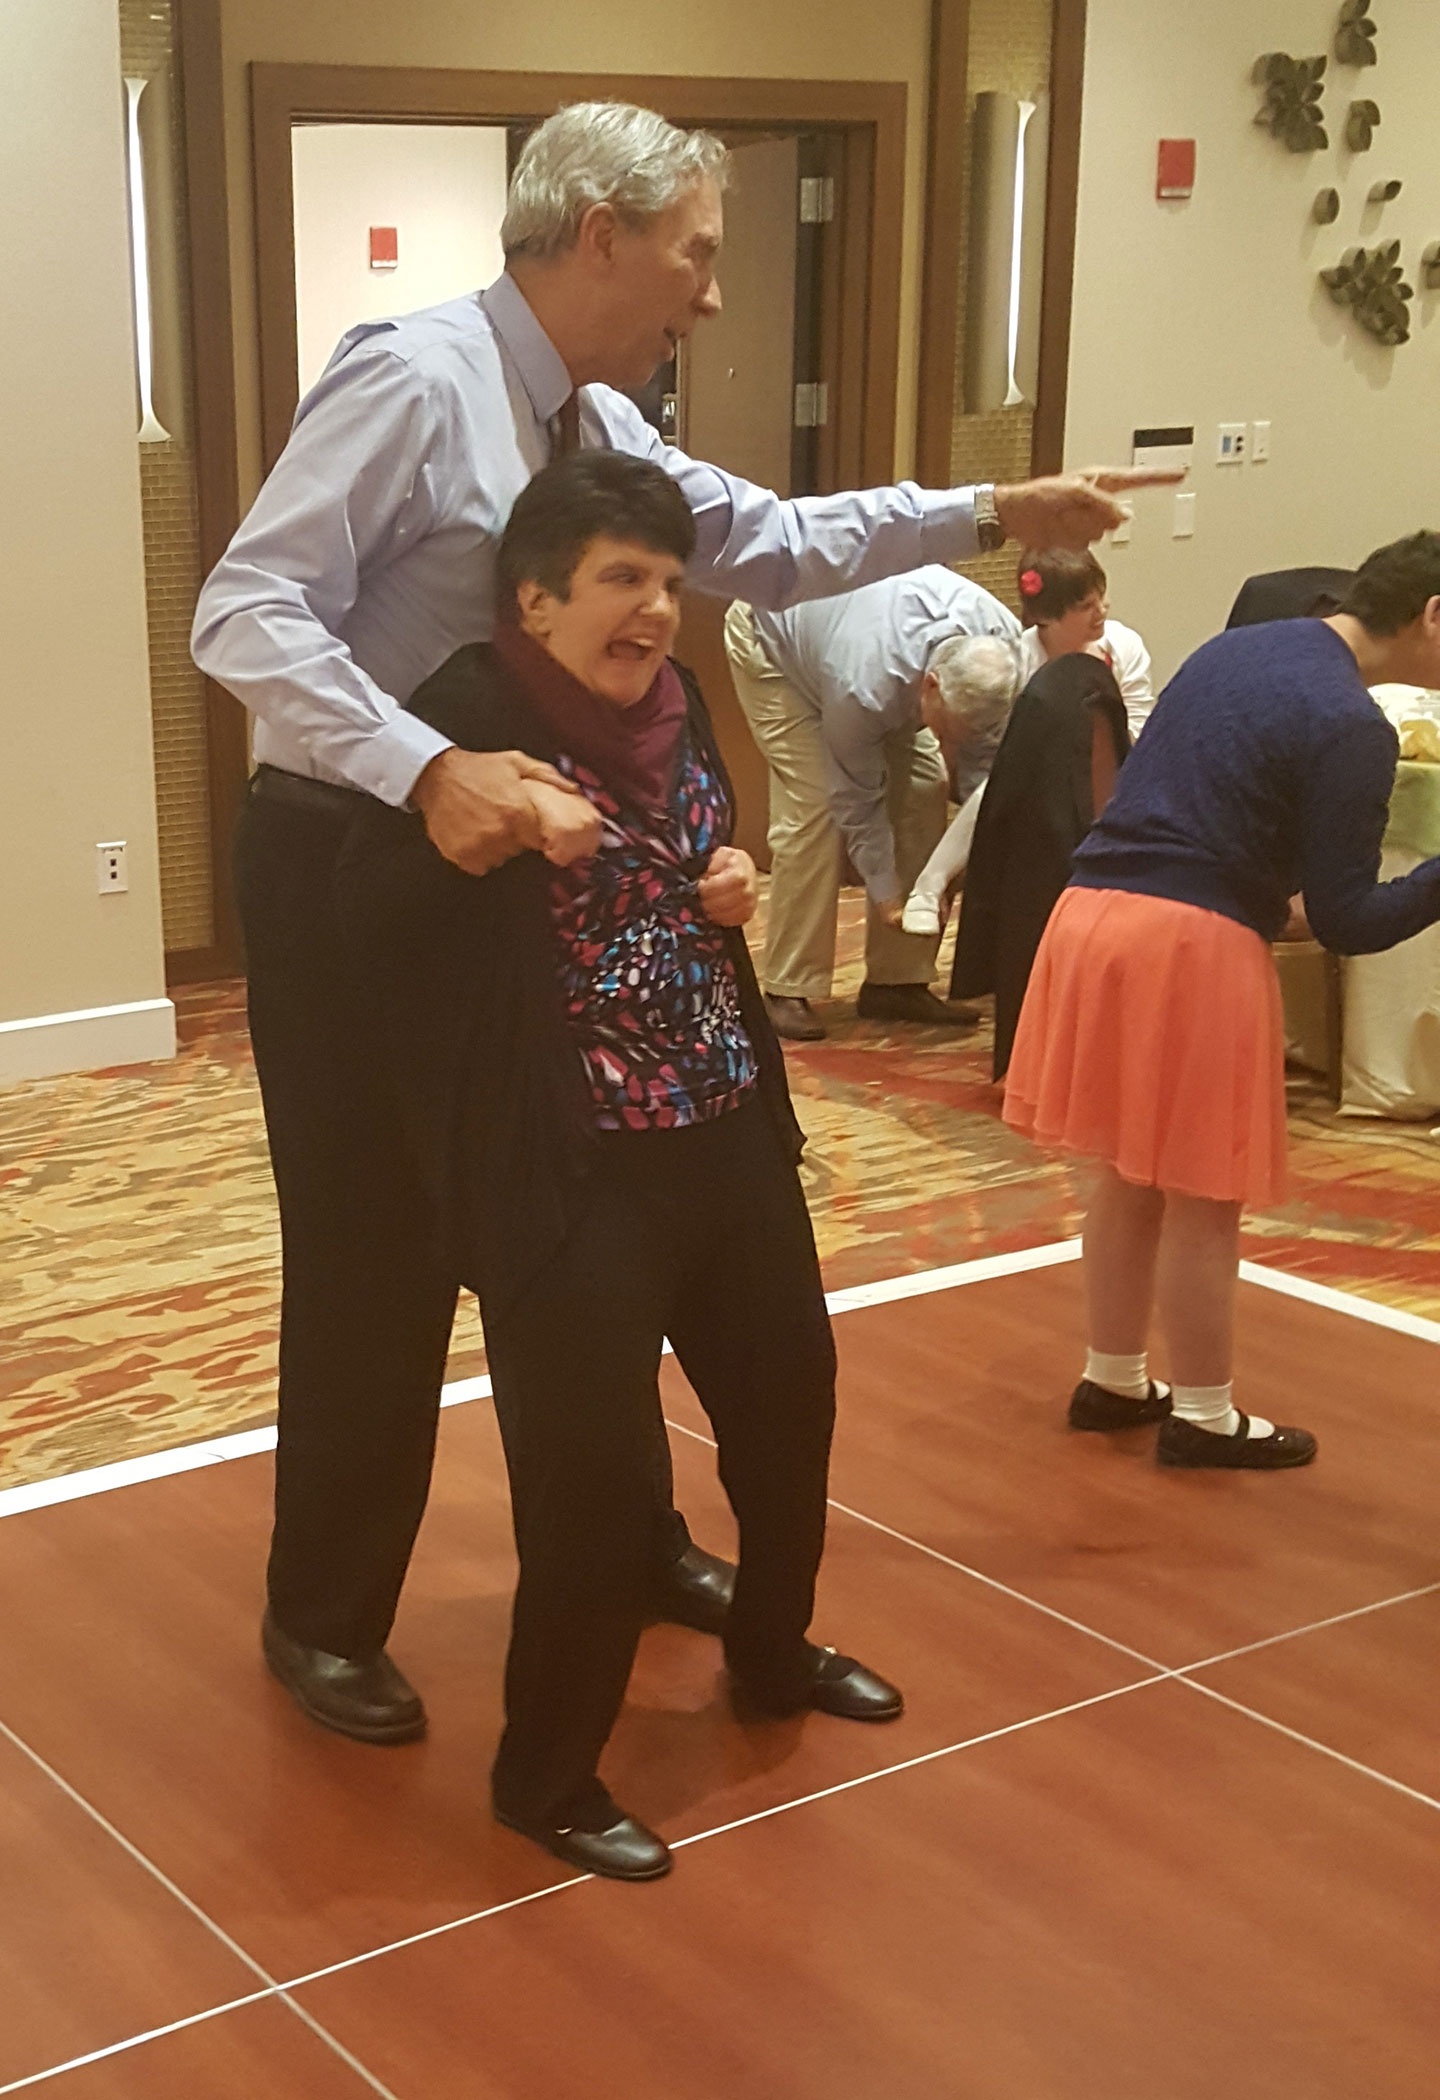 On Thursday, June 16, a Welcome Dinner was held at the Washingtonian Marriott in Gaithersburg Maryland in the Lakeside Ball Room, with many staff members, individuals and their families in attendance, spending time and getting to know everyone.